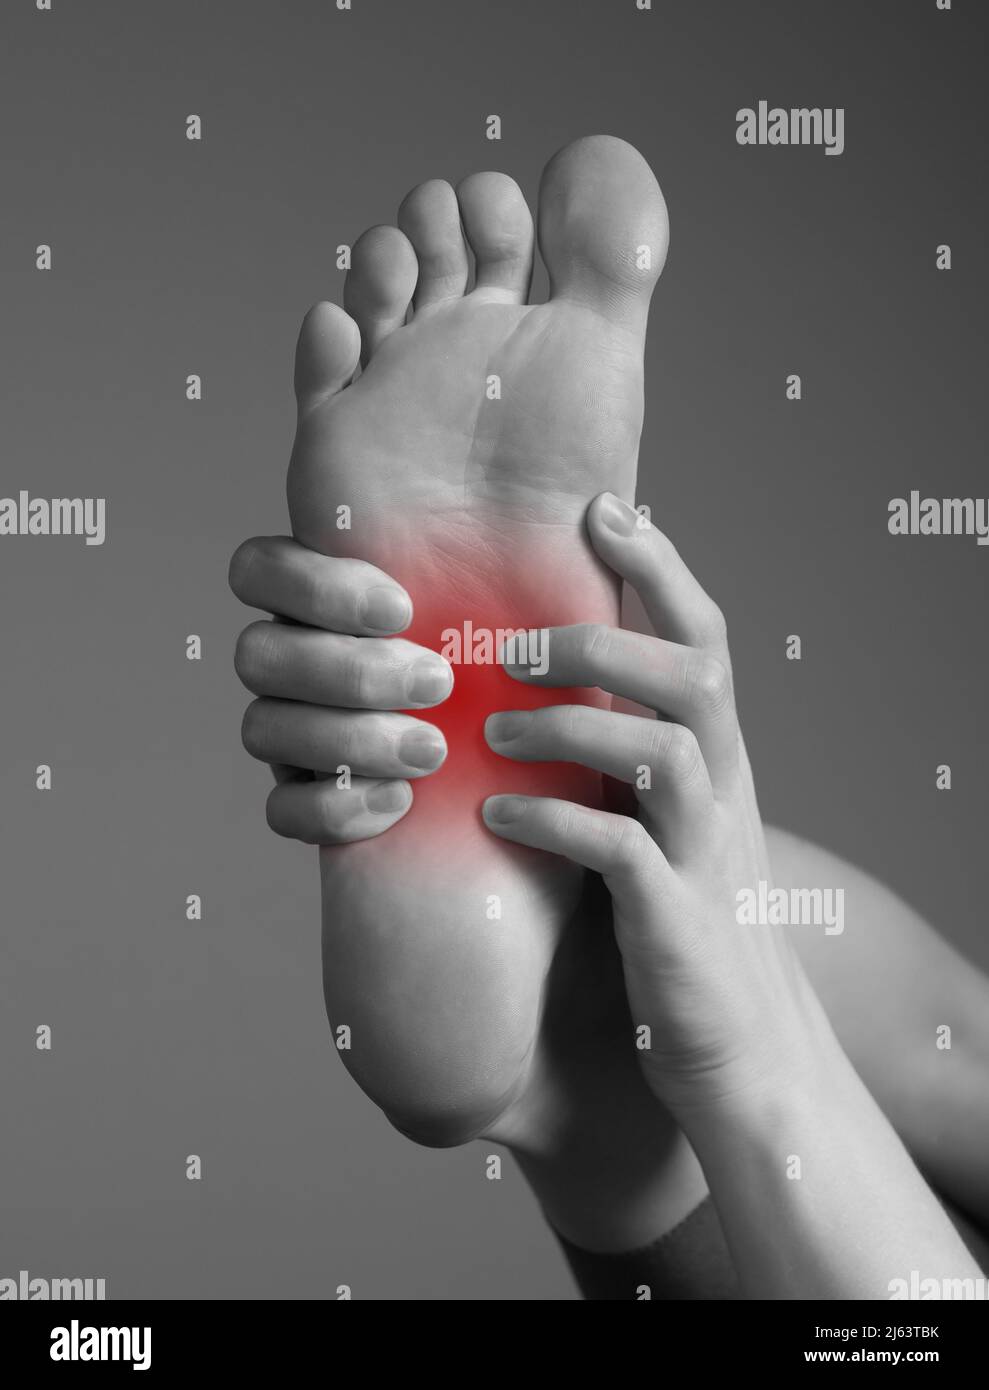 Arch pain caused by inflammation, overuse, plantar fascia injury. Woman hands holding foot with red point. Black and white. Orthopedic complaints and health problems concept. High quality photo Stock Photo